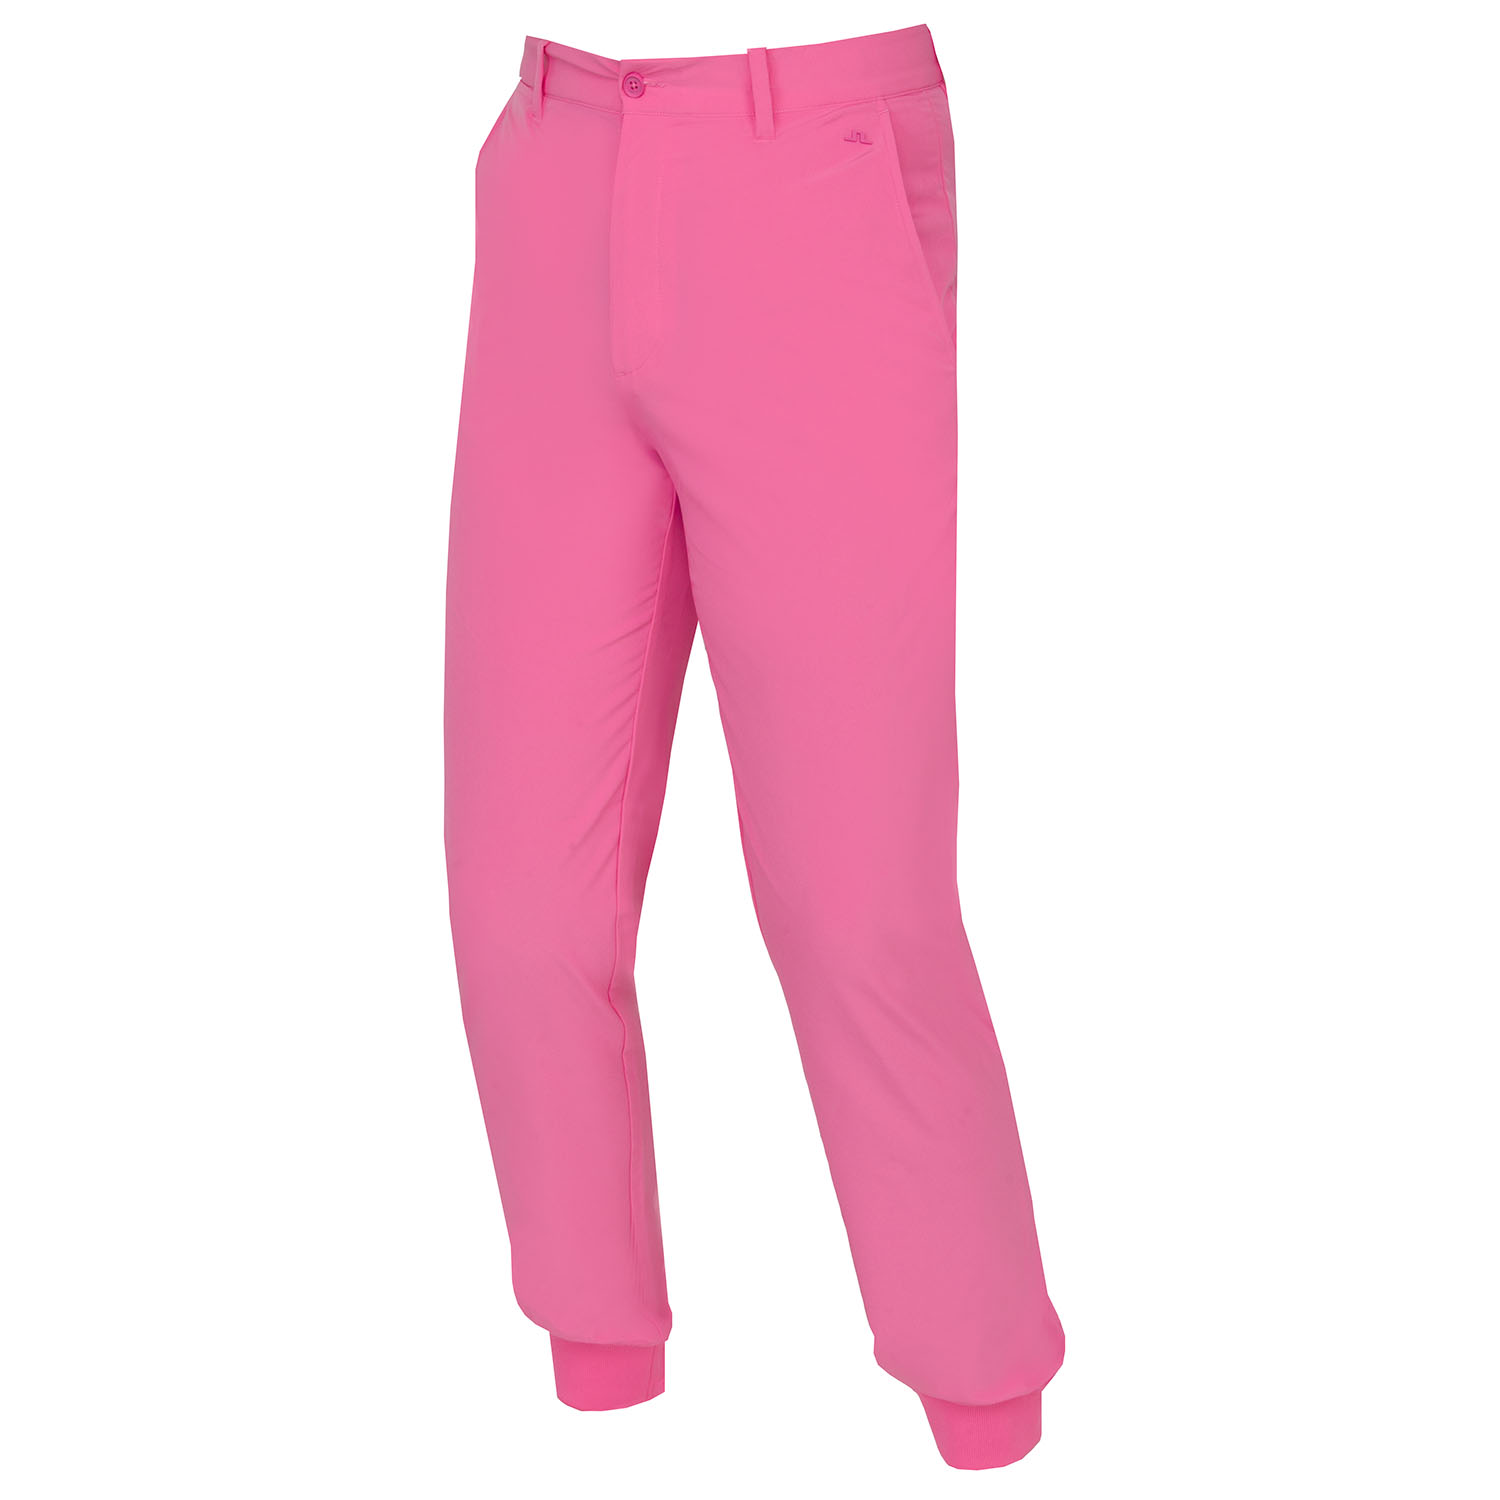 J Lindeberg Cuff Jogger Golf Trousers